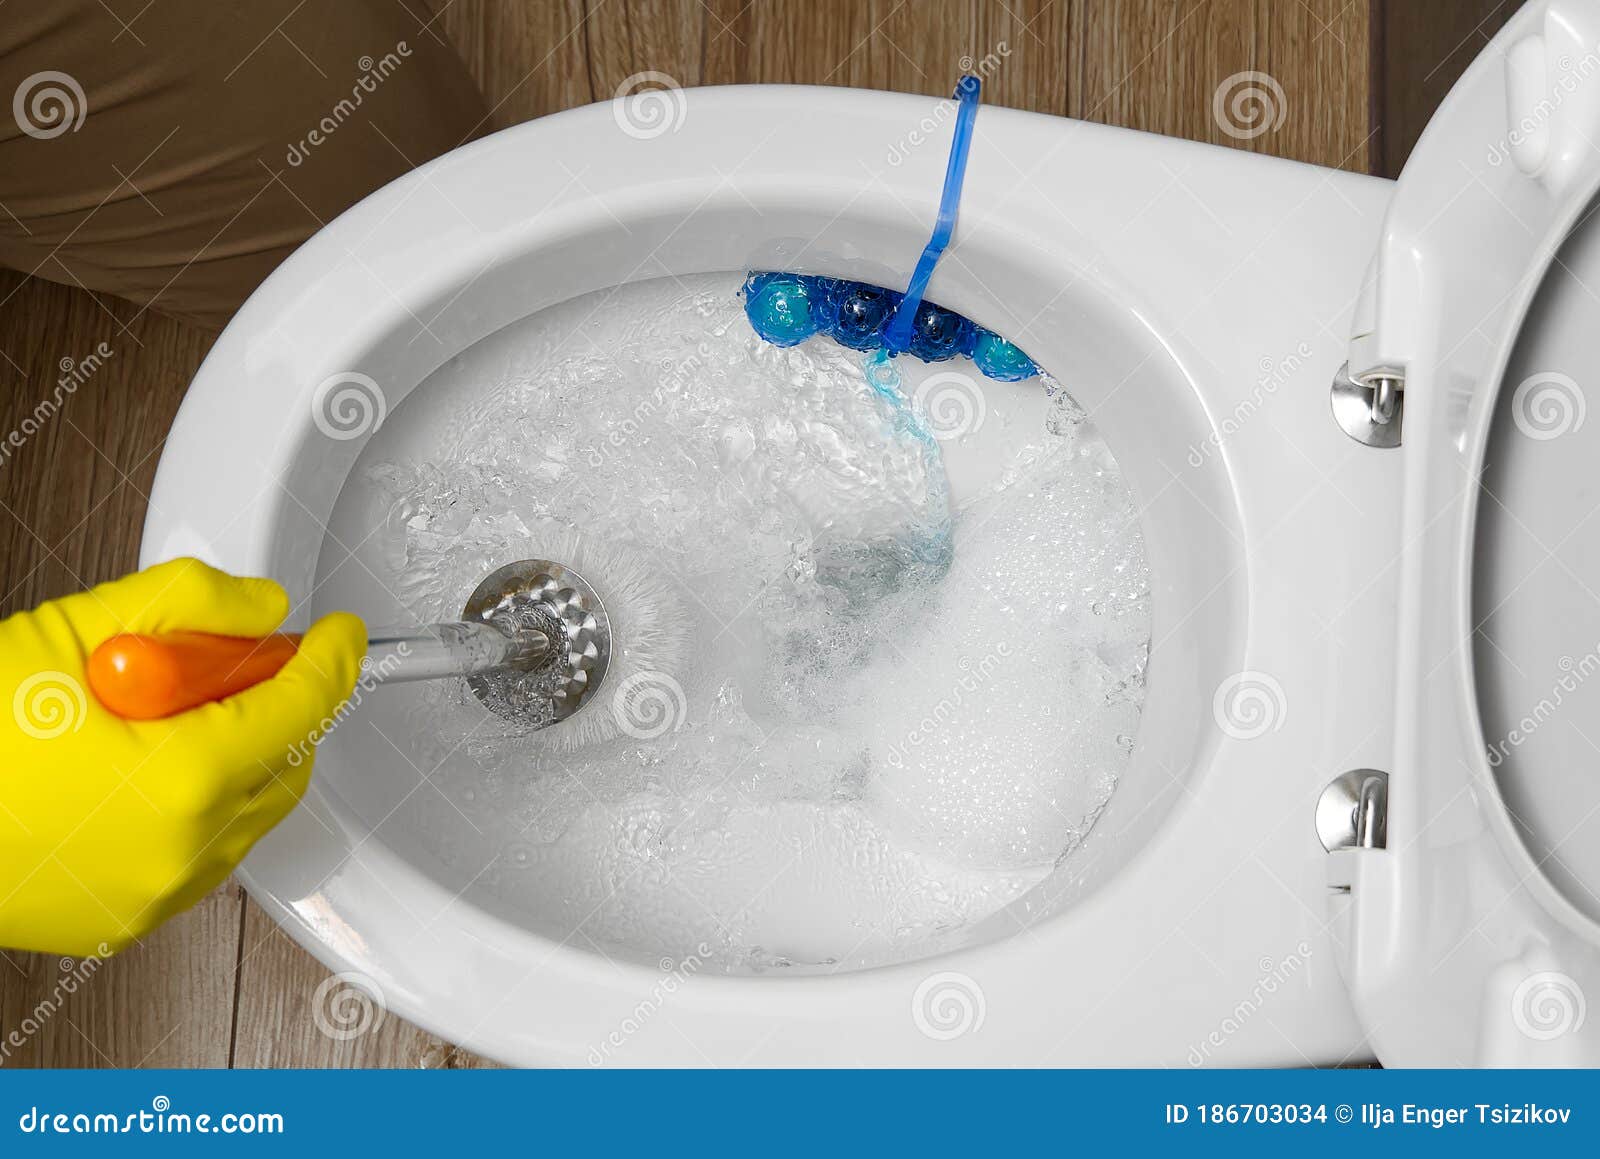 Plumber With A Toilet Plunger Stock Photo 66600082 